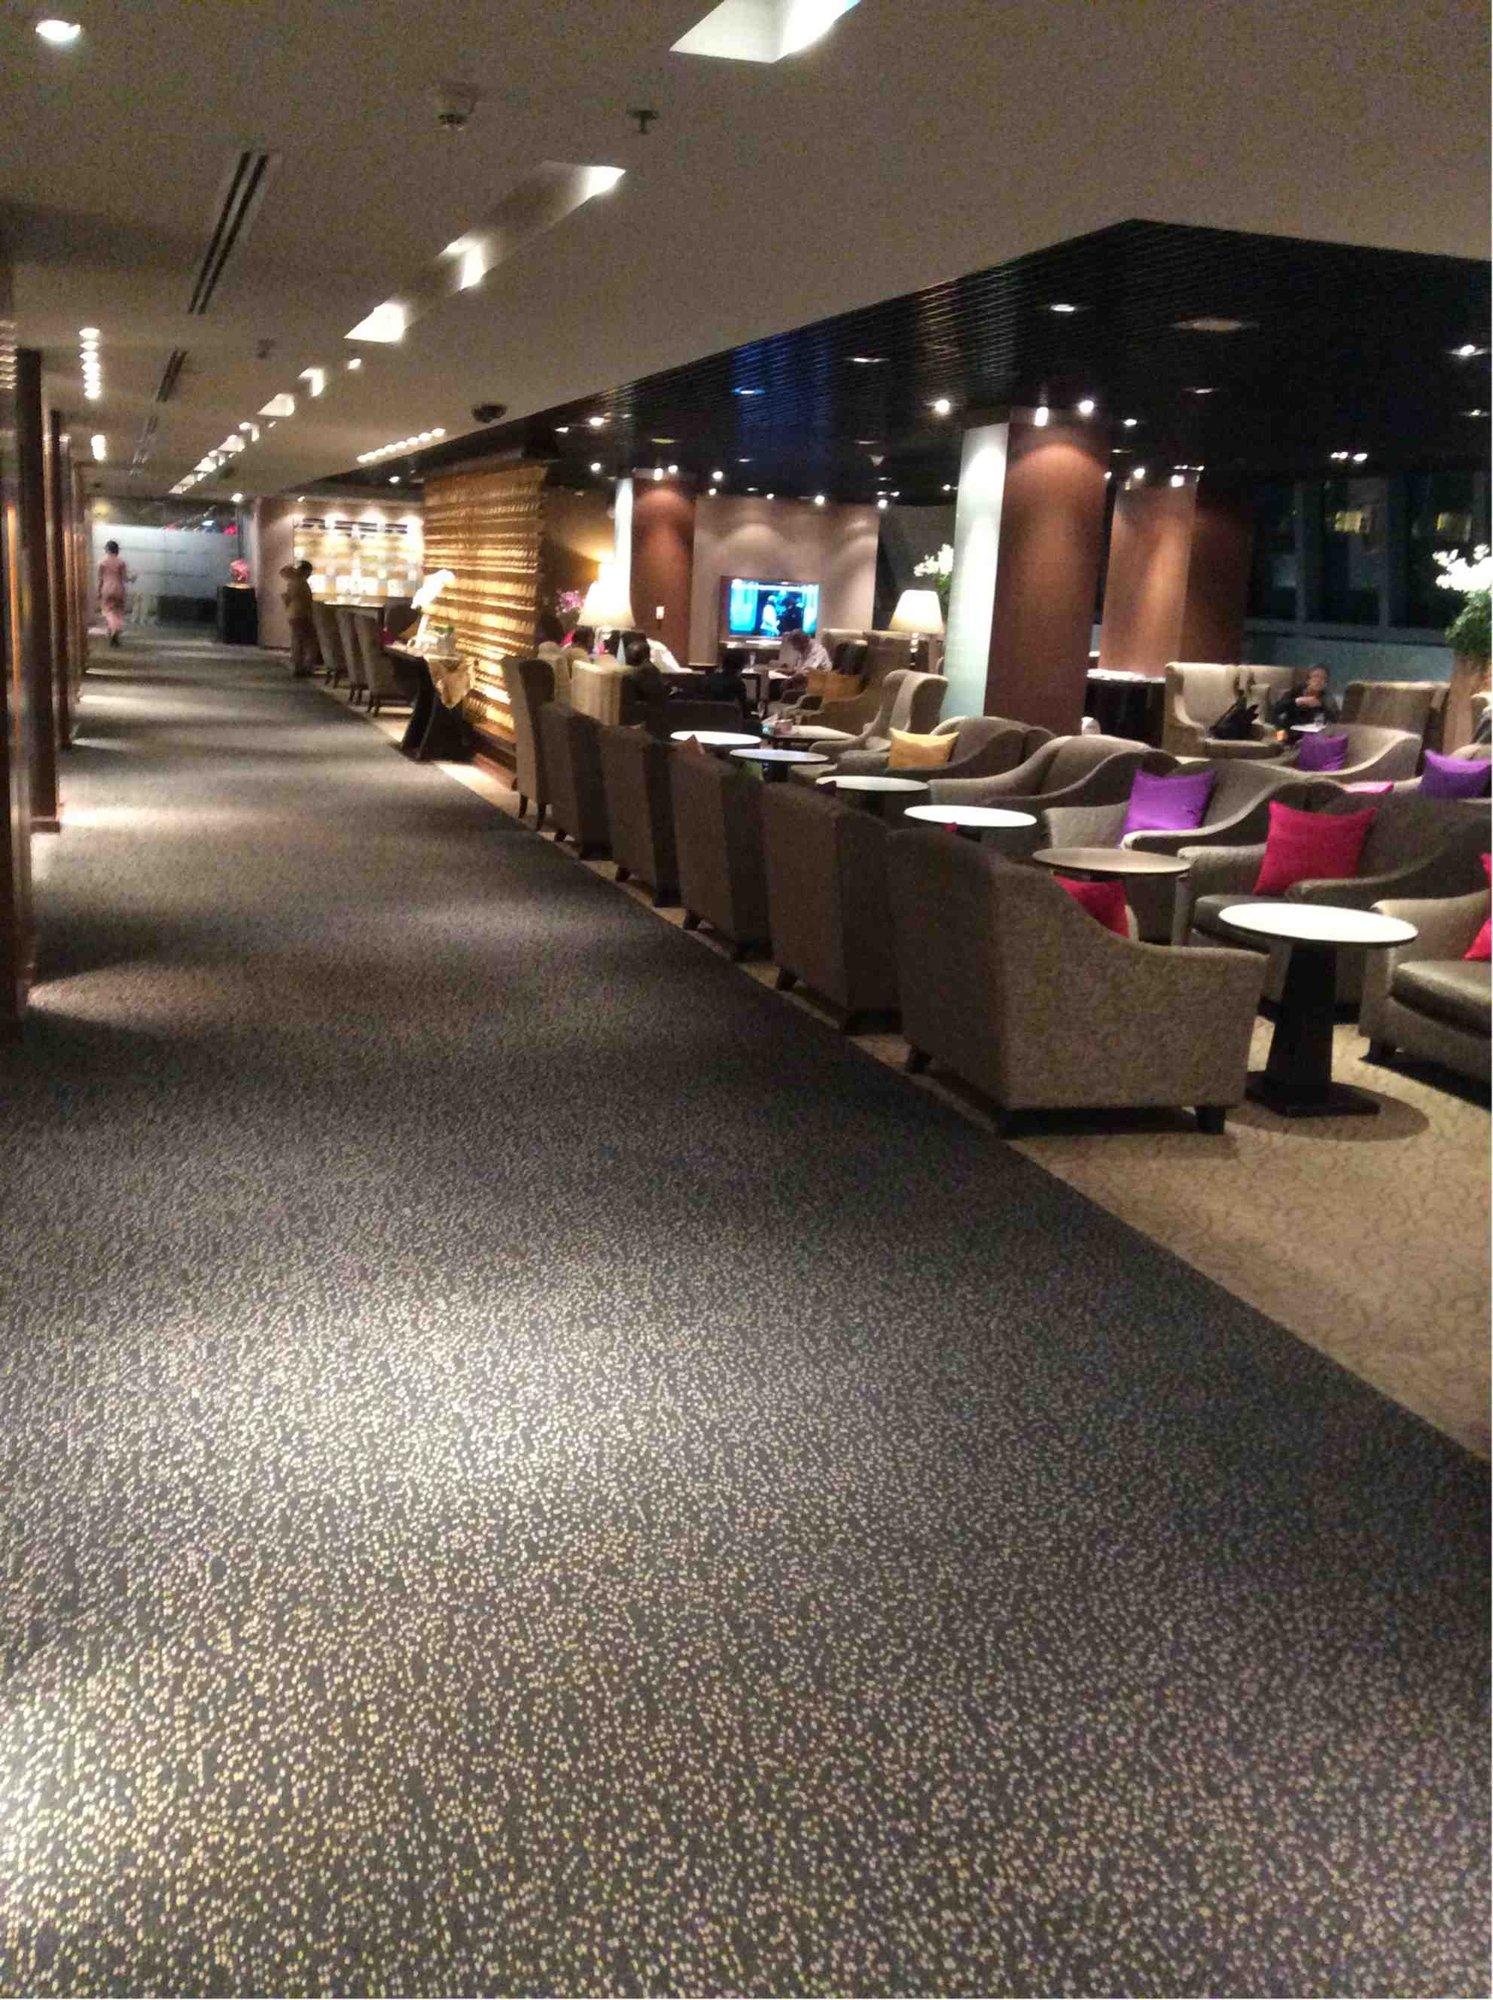 Thai Airways Royal First Class Lounge image 17 of 44